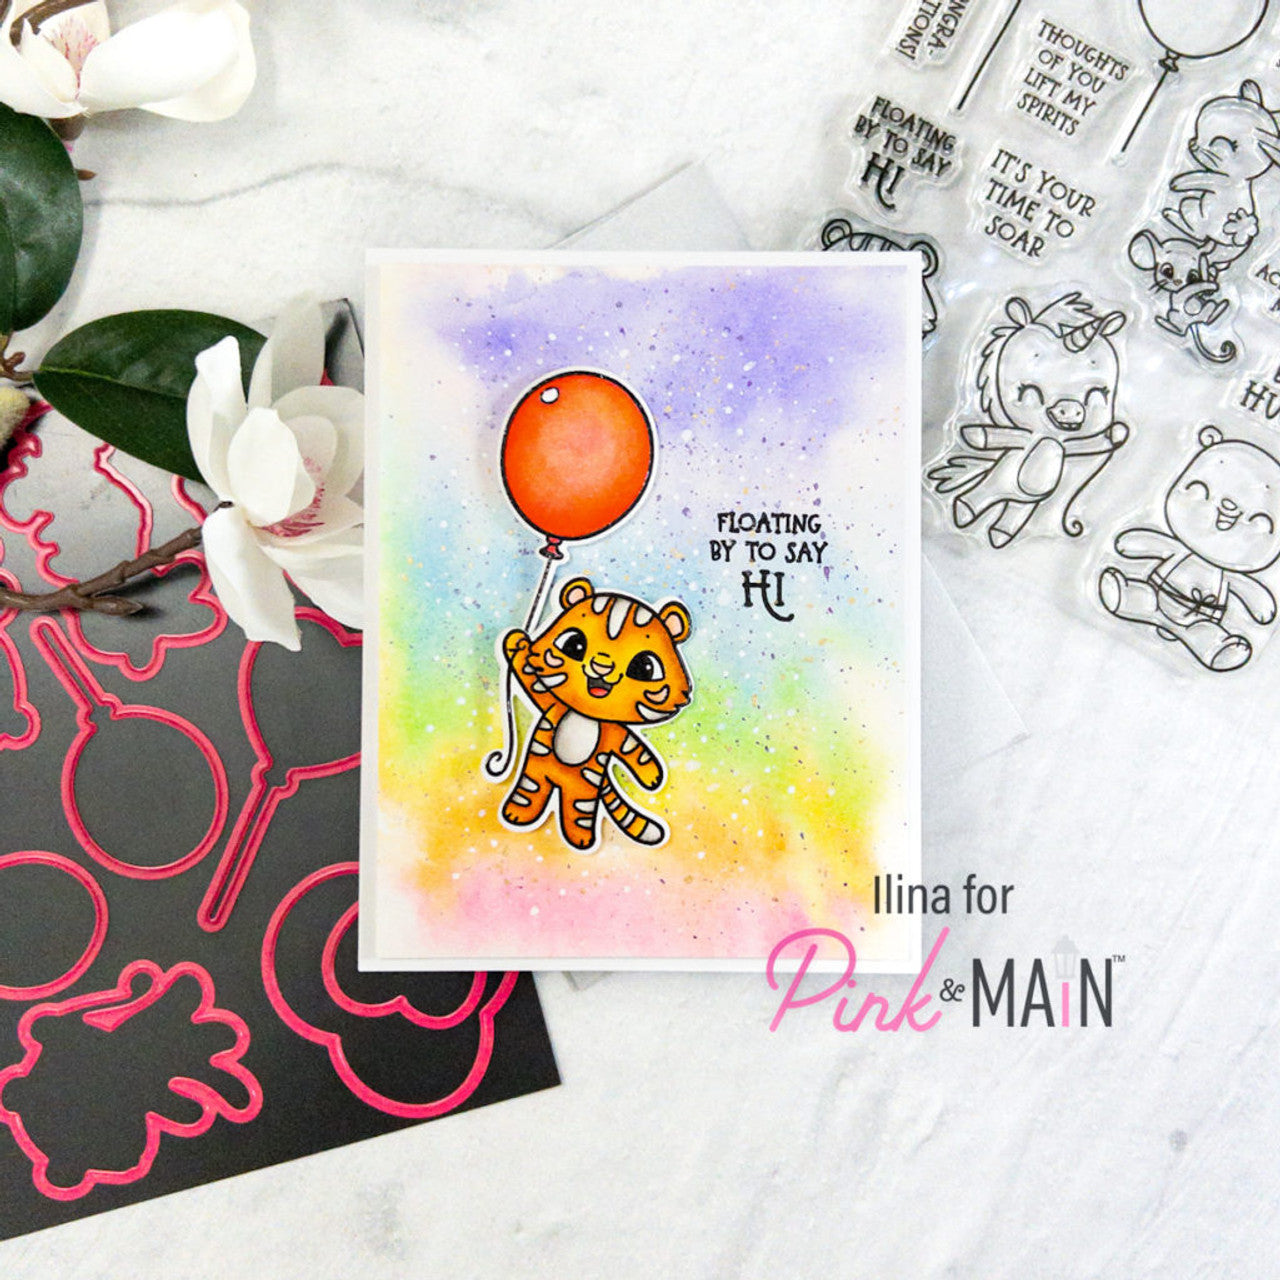 Pink & Main Floating By Stamp Set